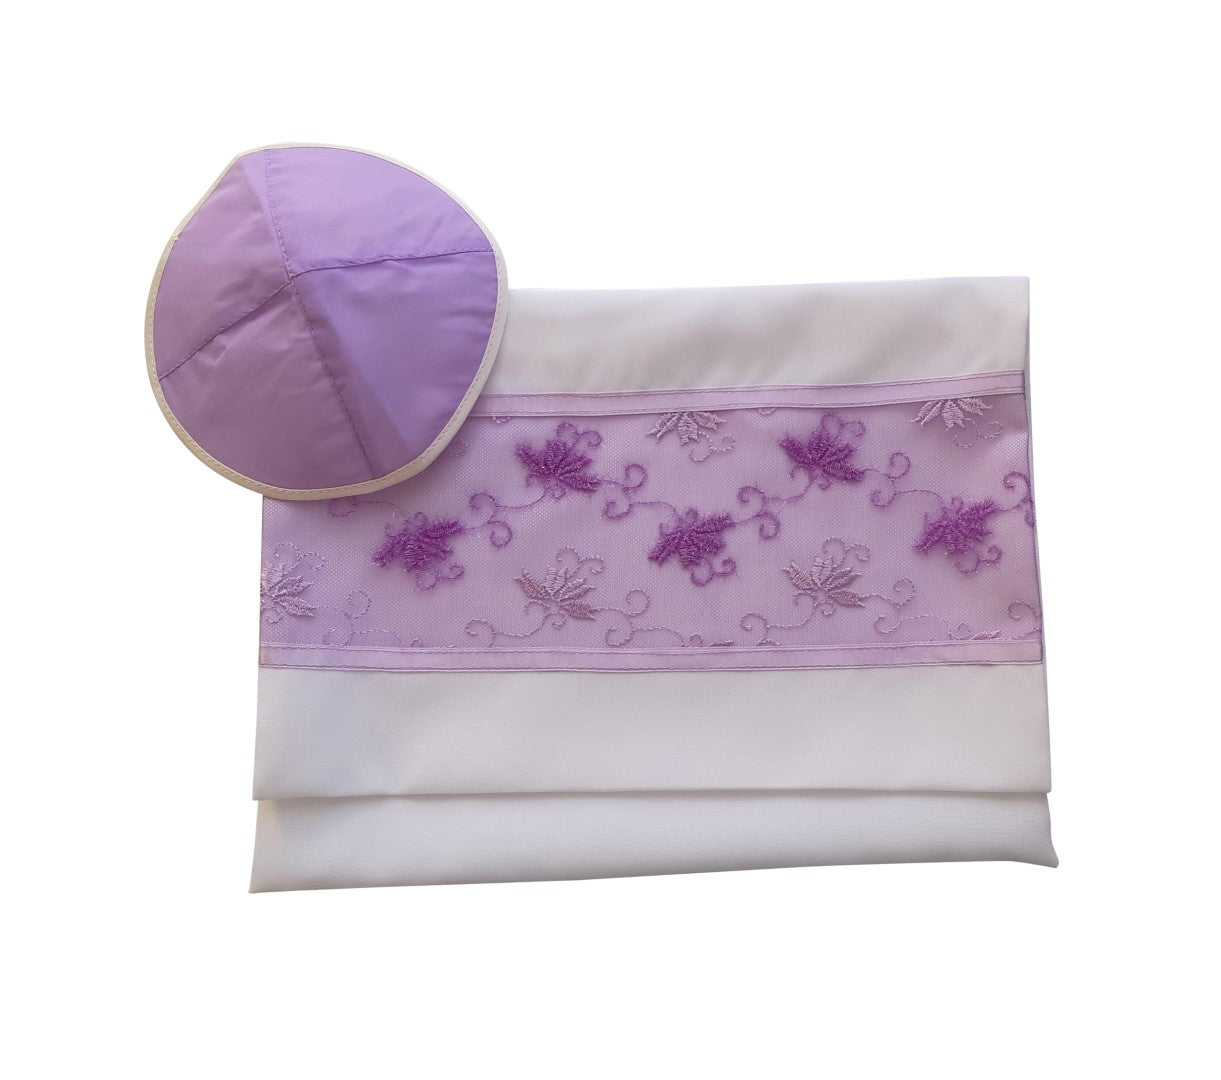 Delicate Lilac Floral Embroidery Tallit for women, Bat Mitzvah Tallit bag, Tallit for Girl, Tzitzit